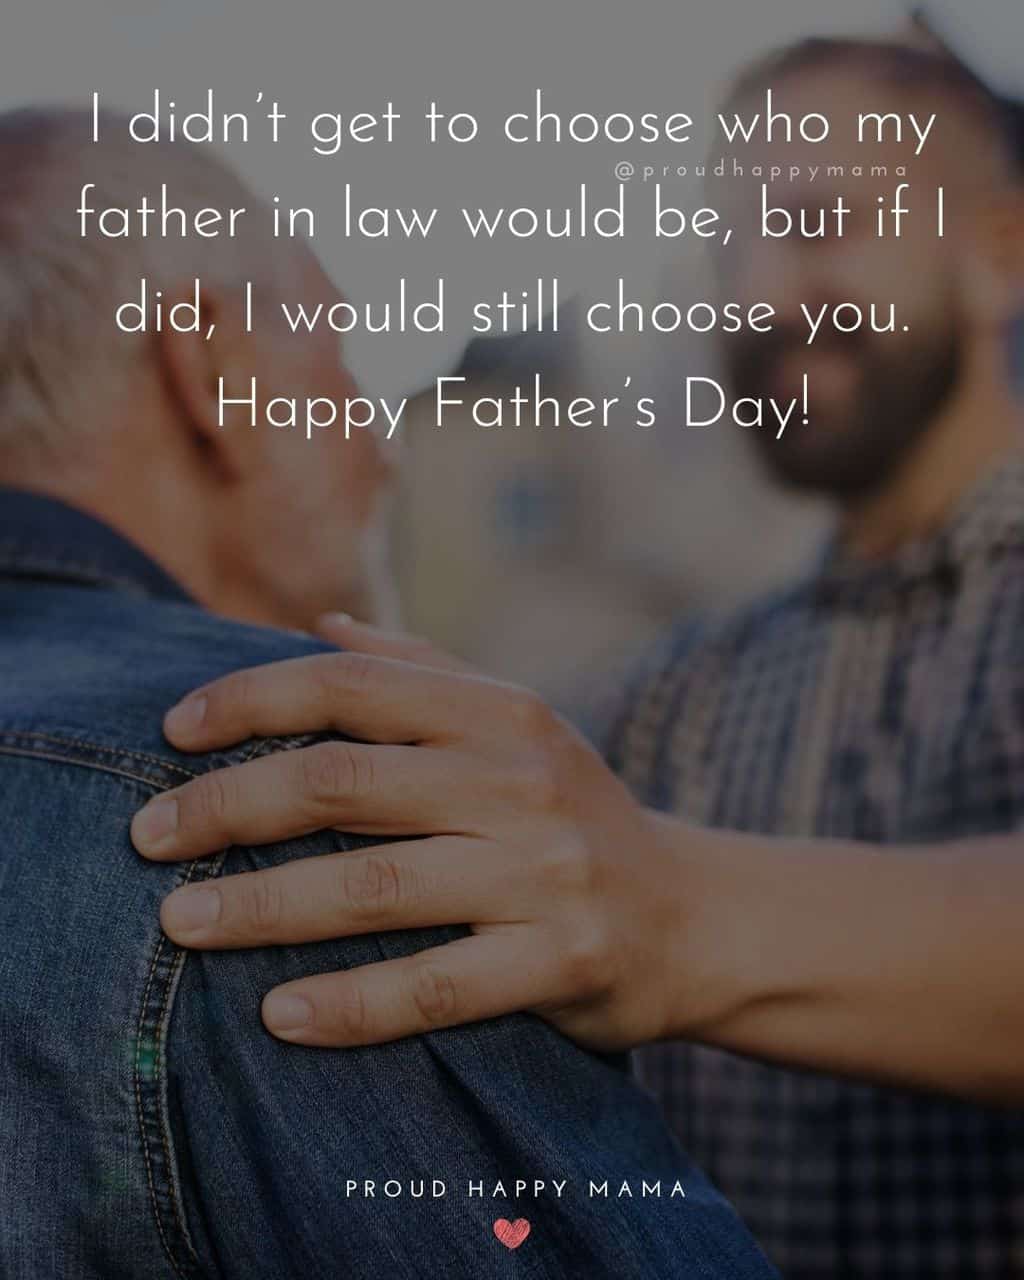 Happy Fathers Day Quotes For Father In Law - I didnt get to choose who my father in law would be